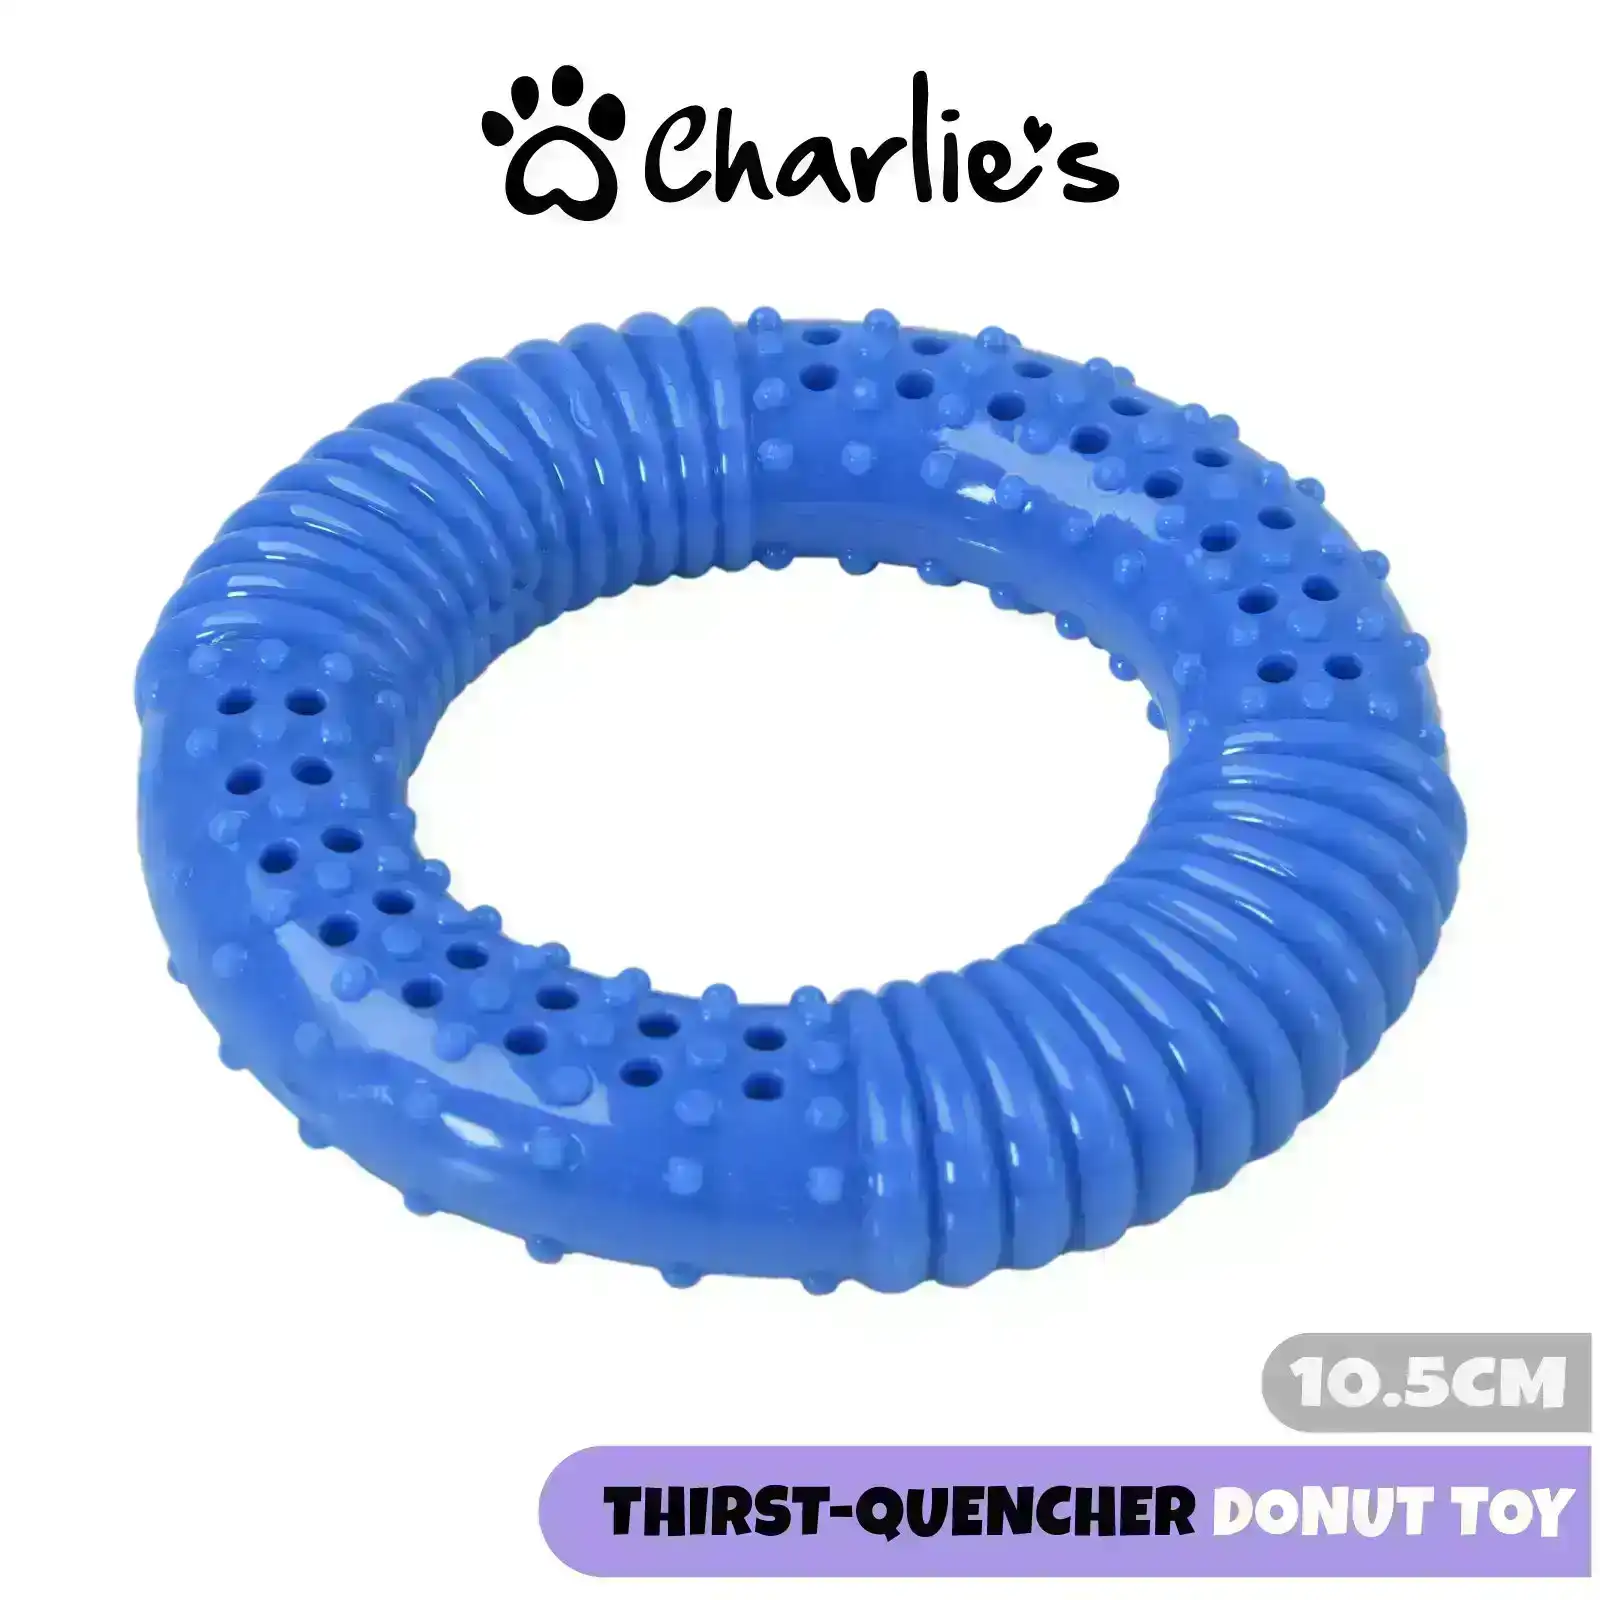 Charlie's Thirst-Quencher Donut Toy Blue 10.5cm